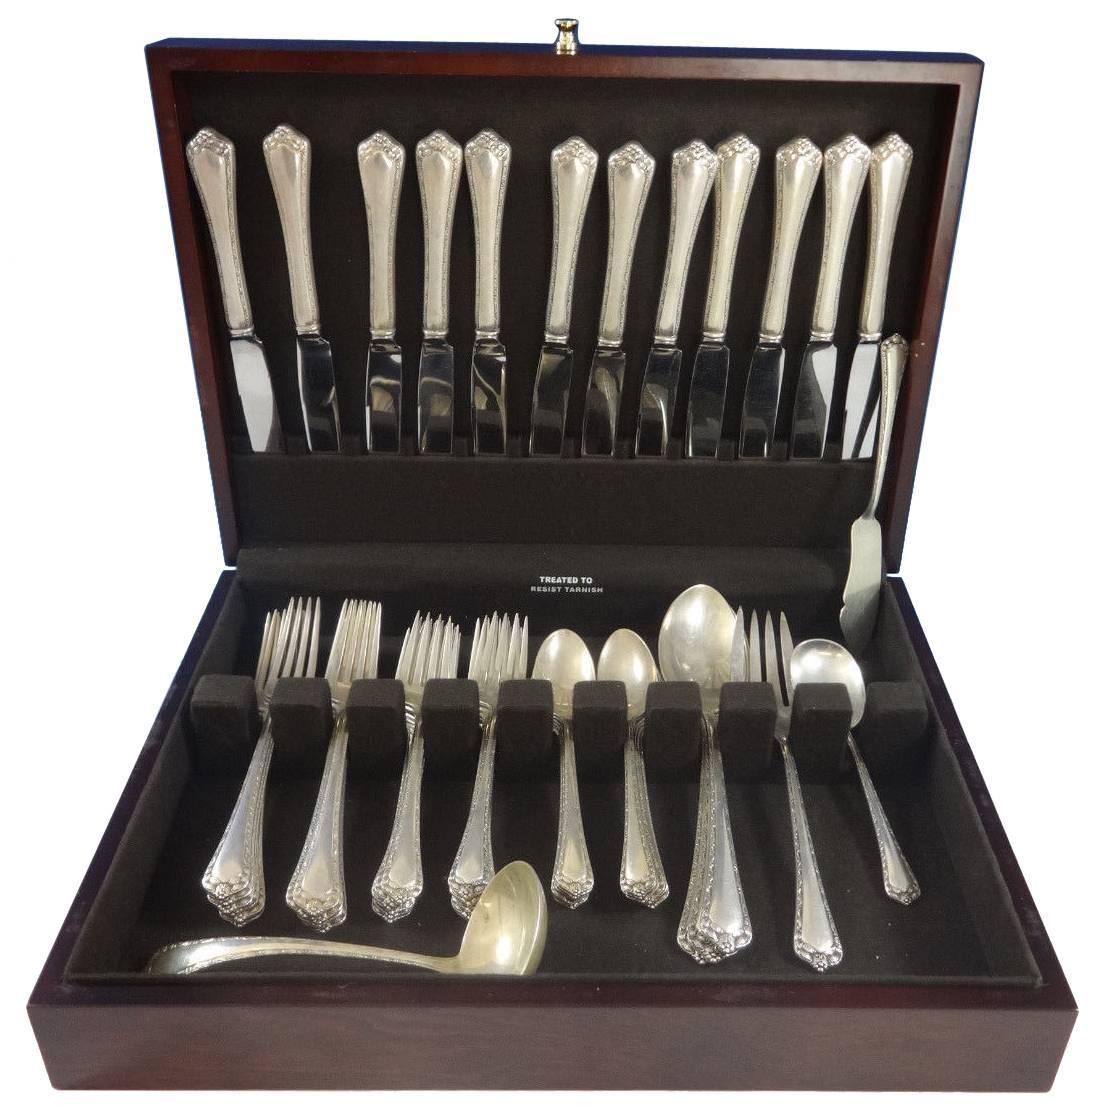 Rosemary by Easterling sterling silver flatware set of 55 pieces. This set includes:

12 knives, 9